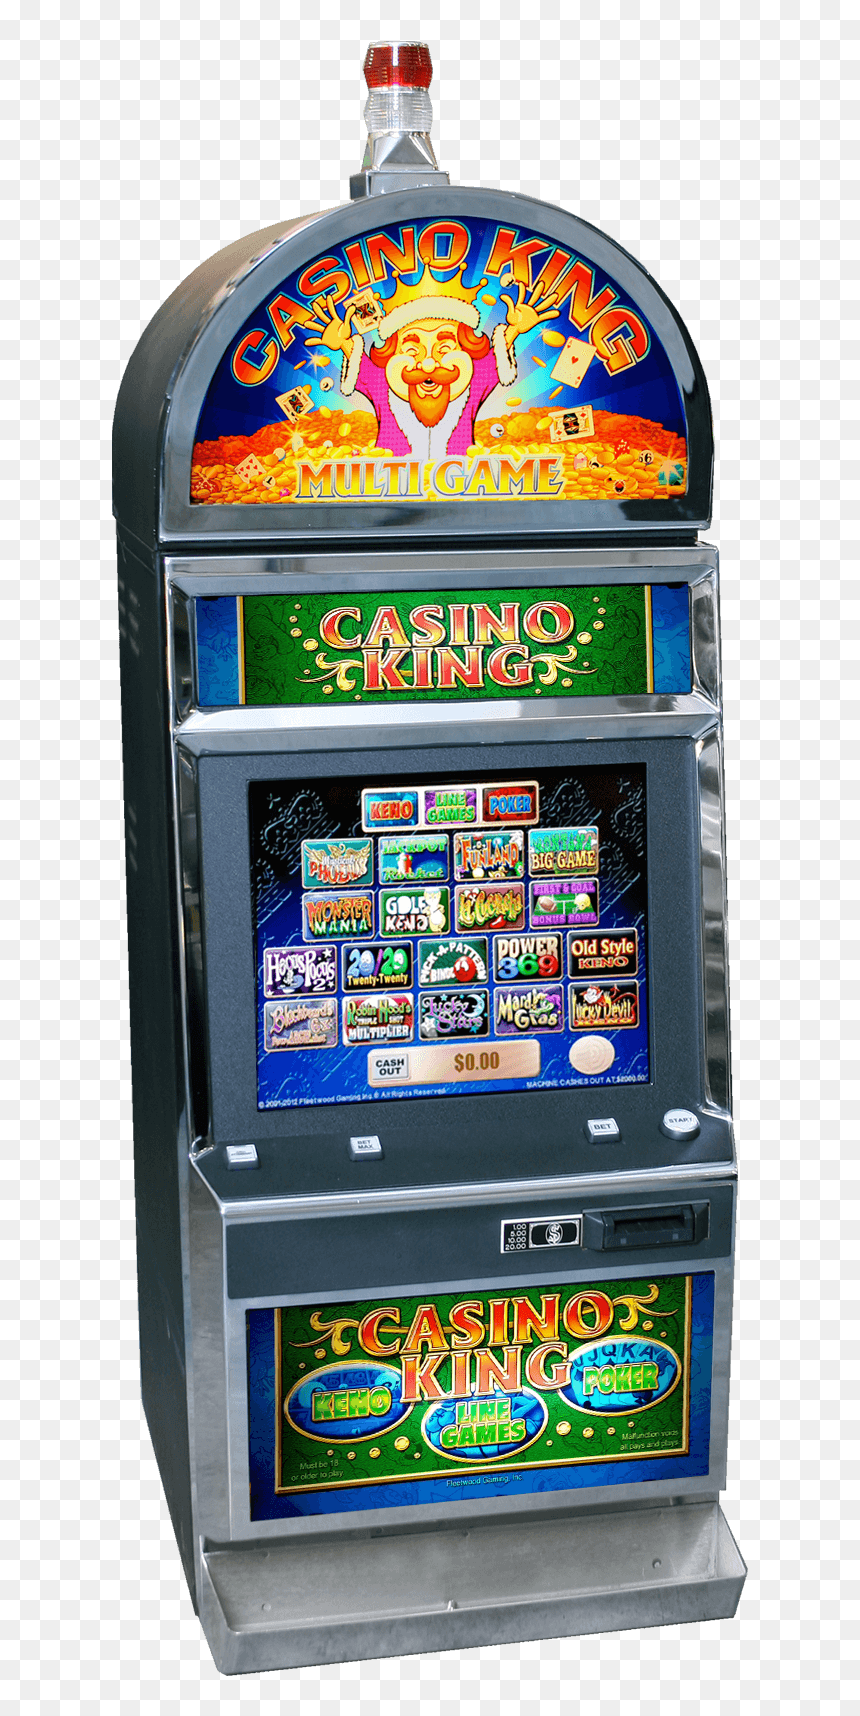 In Super slots (ซุปเปอร์สล็อต), find everything that users are looking for to play post thumbnail image